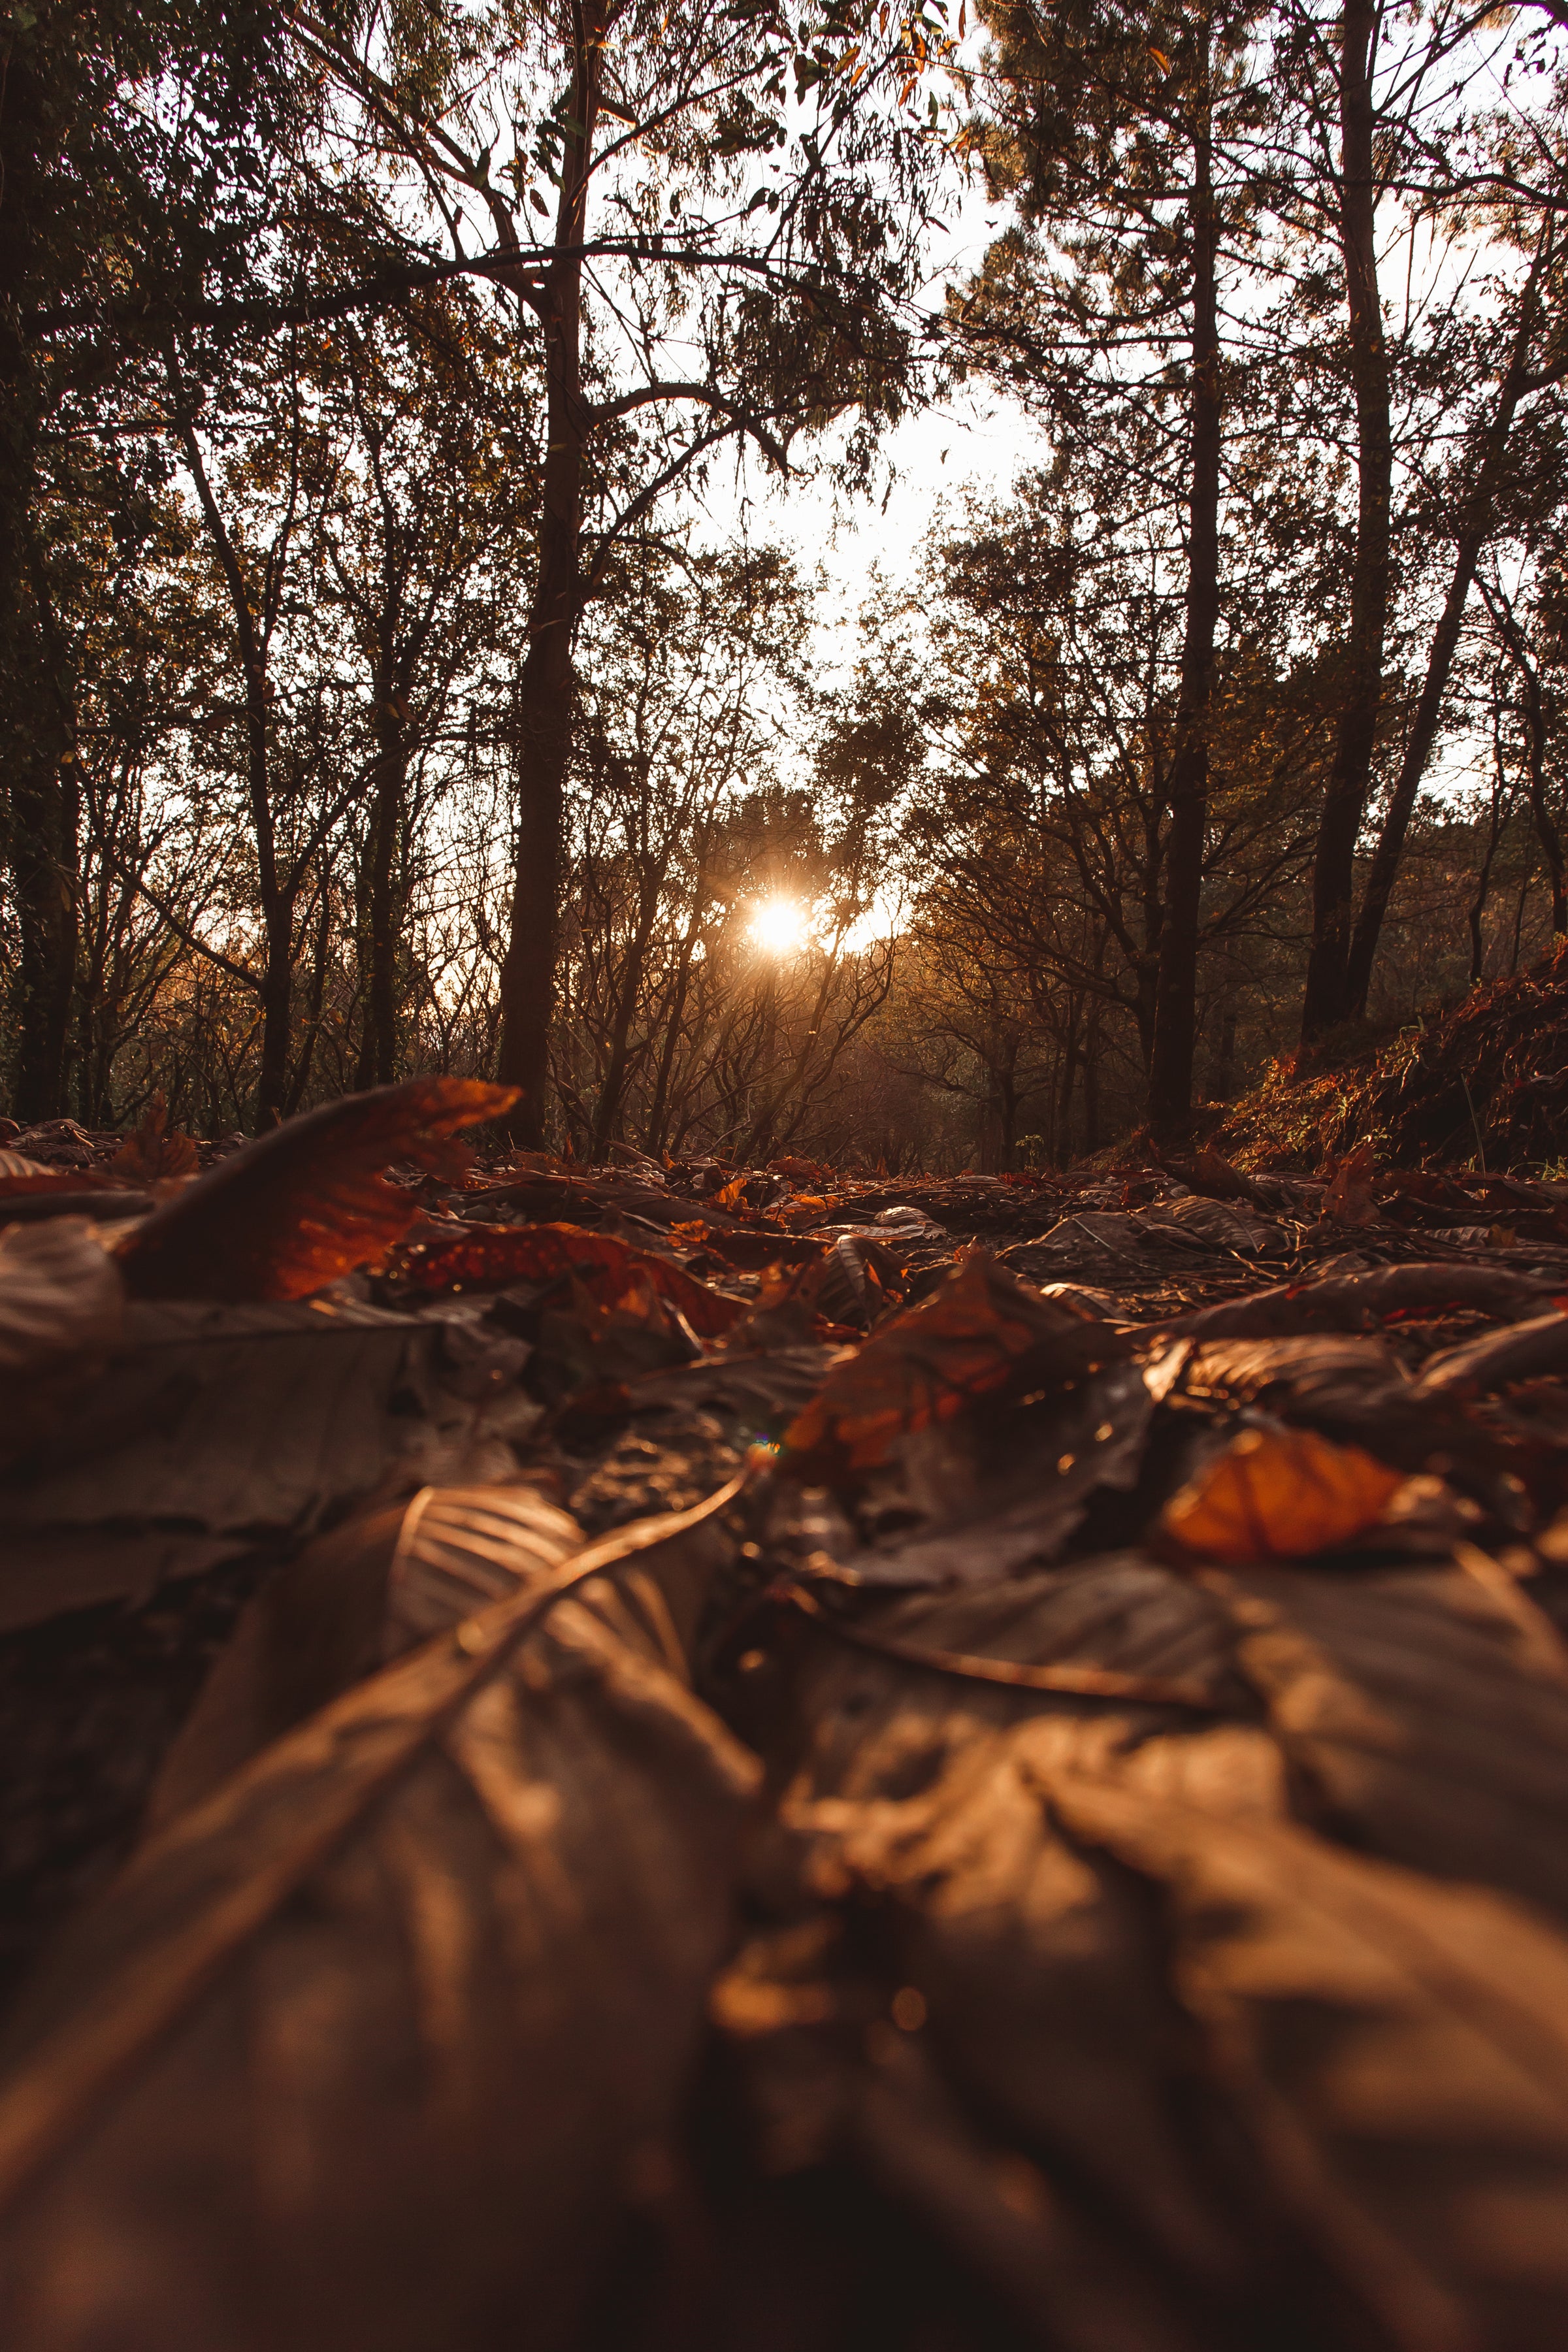 The sun sets on a withering forest. Autumn leaves of red, orange, yellow, and brown cover the ground.